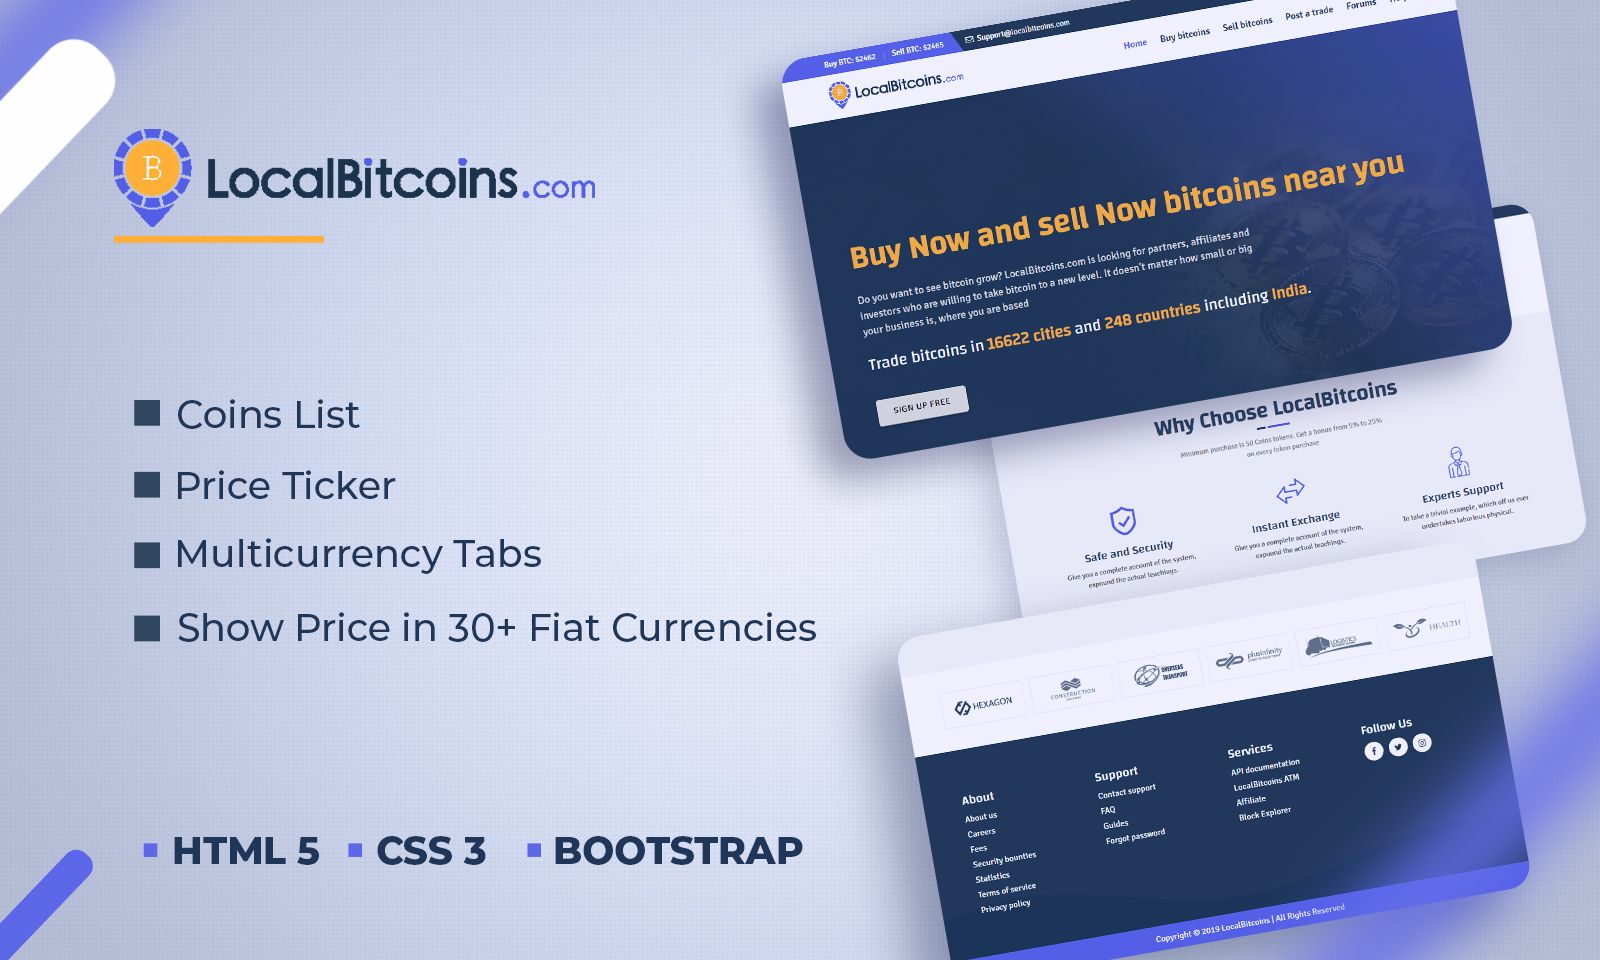 Cryptocurrency Wallet Website Template - HTML5